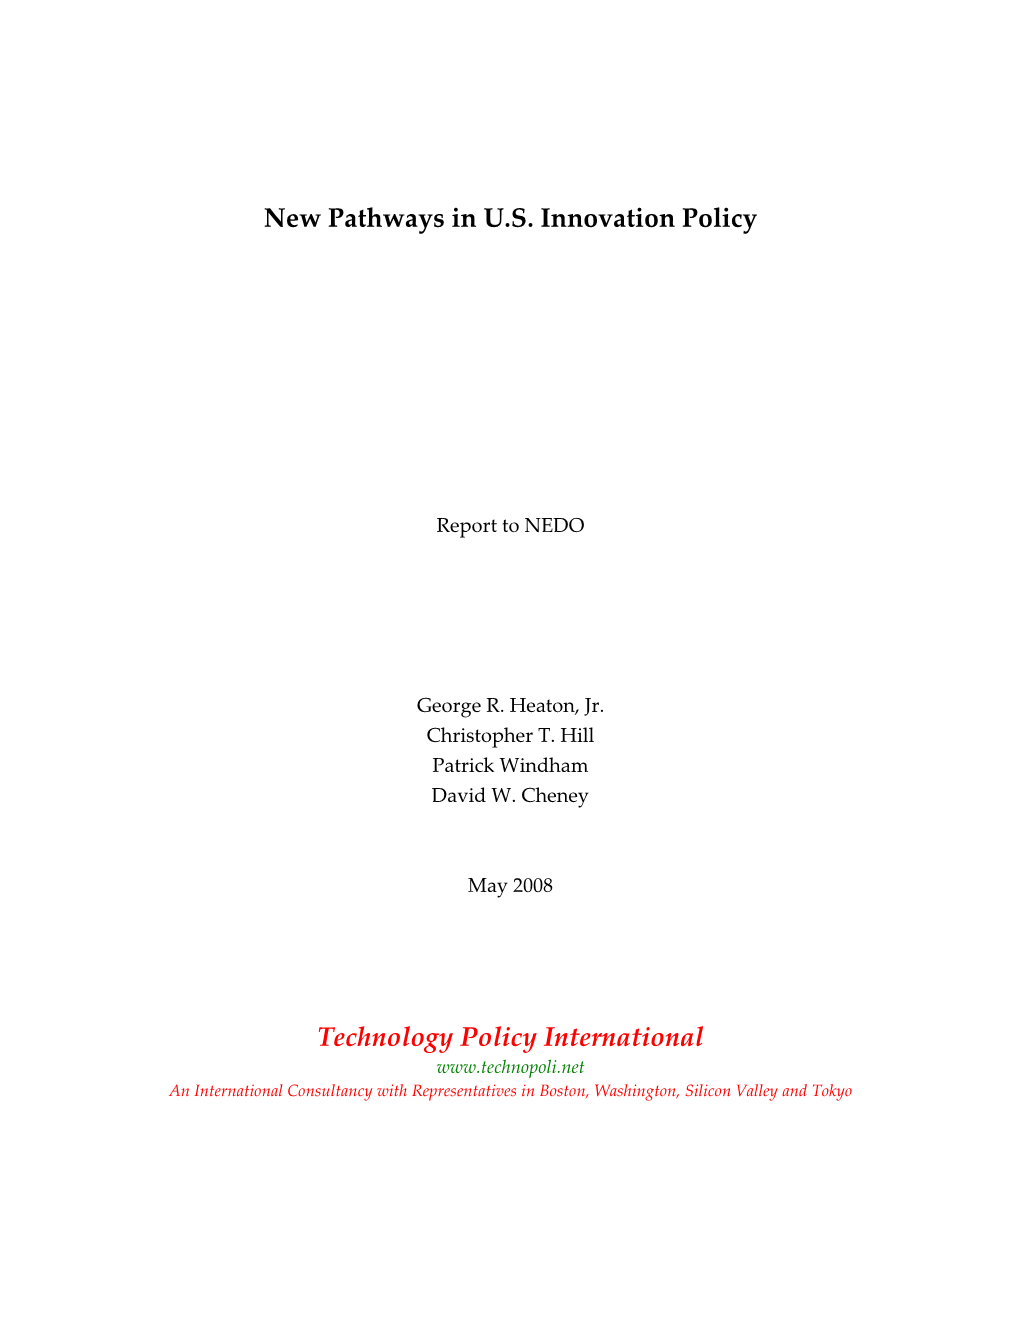 New Pathways in U.S. Innovation Policy Technology Policy International